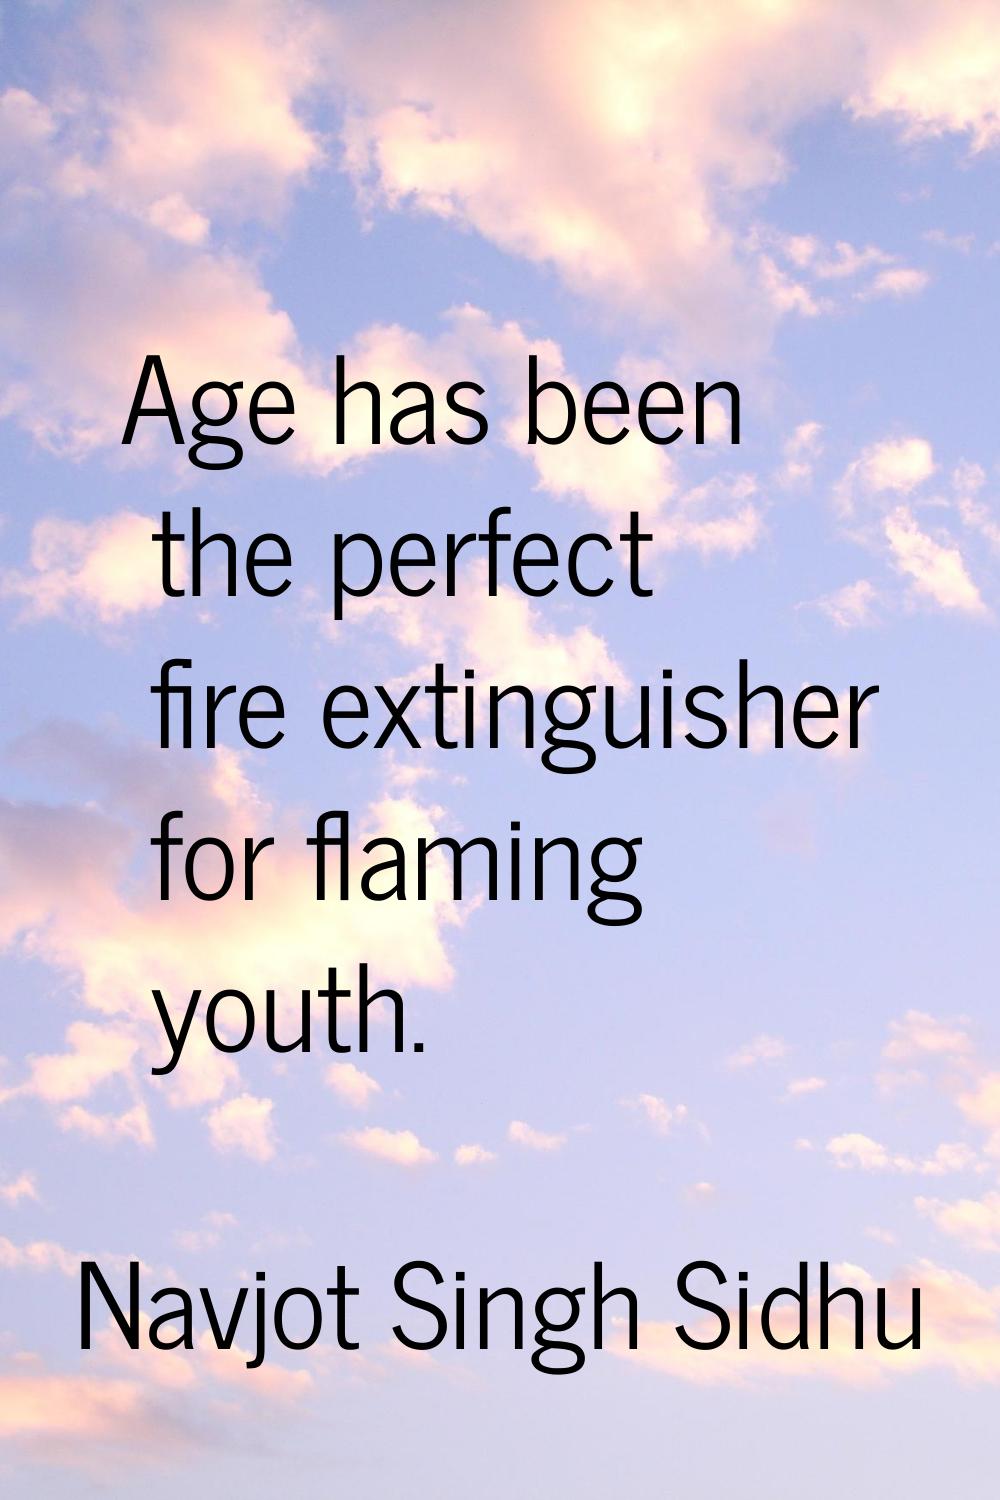 Age has been the perfect fire extinguisher for flaming youth.